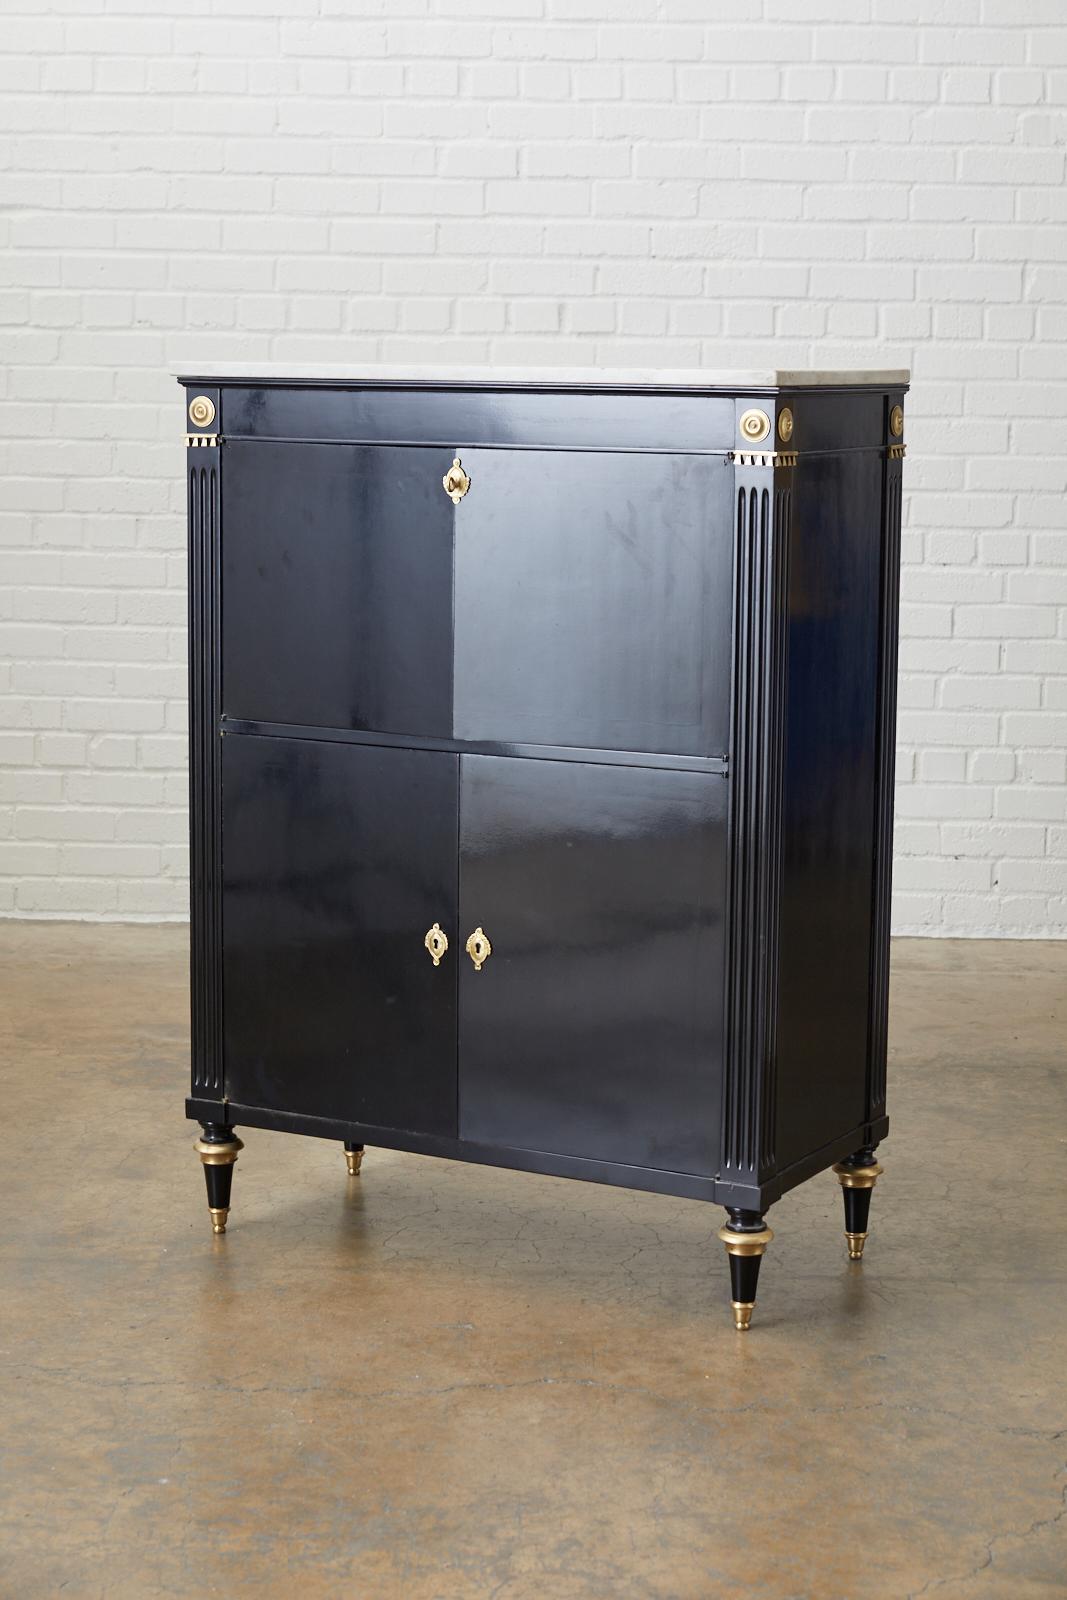 Fantastic neoclassical directoire style dry bar cabinet by Maison Jansen. Features an ebonized mahogany case having a Carrara marble top. The case is decorated with bronze embellishments and reeded column style corners. The top opens to a glass